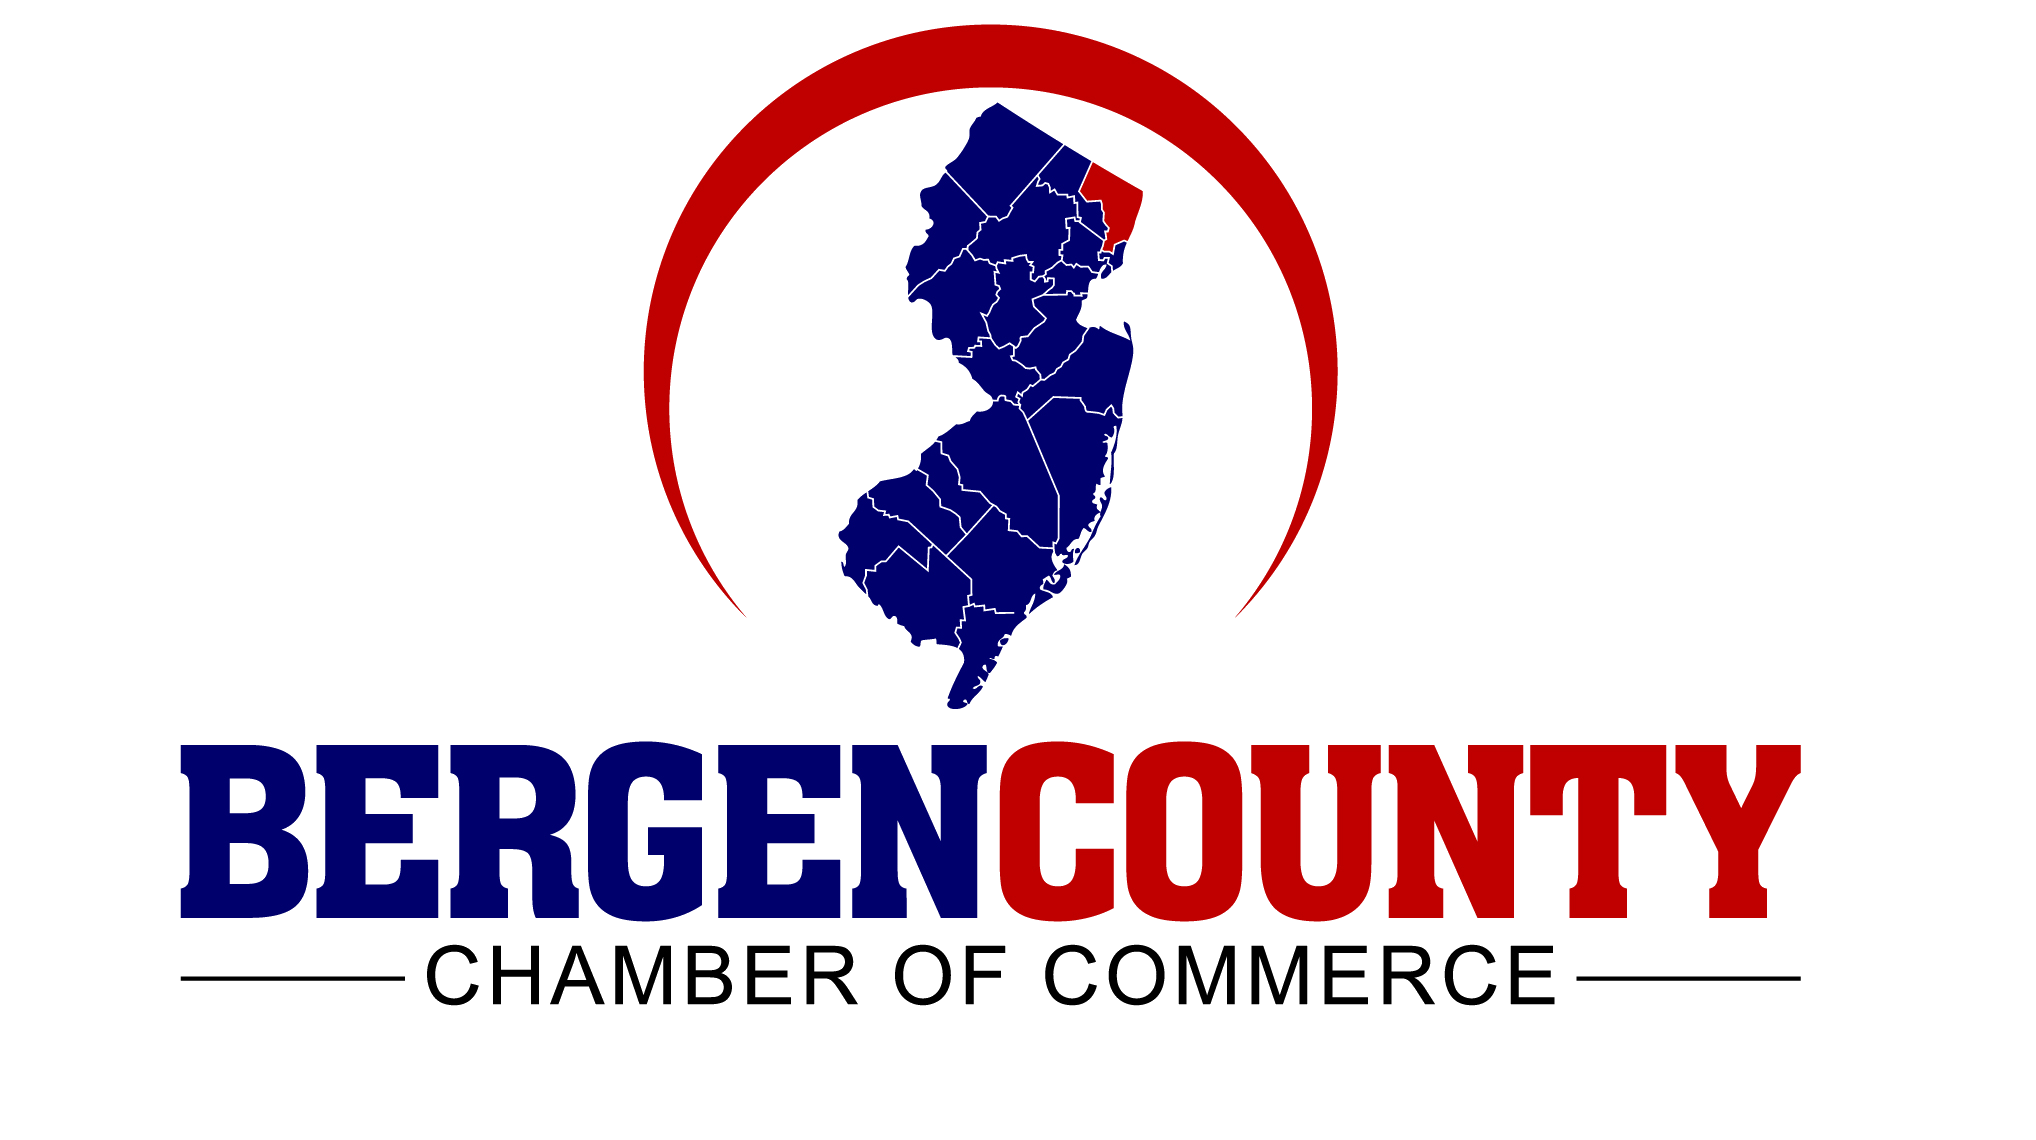 The Bergen County Chamber of Commerce